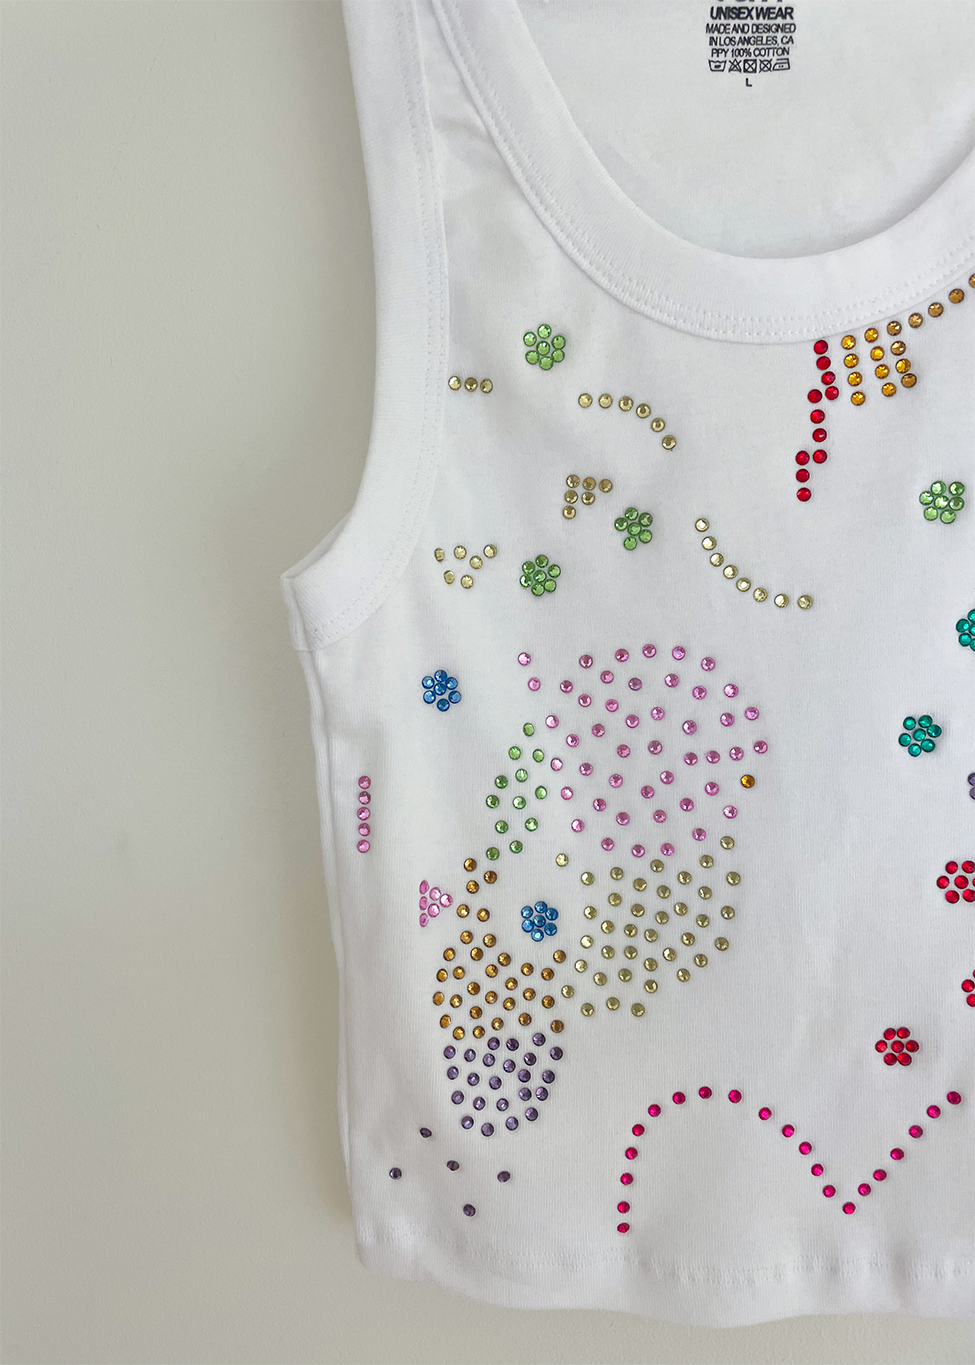 Bedazzled Tank